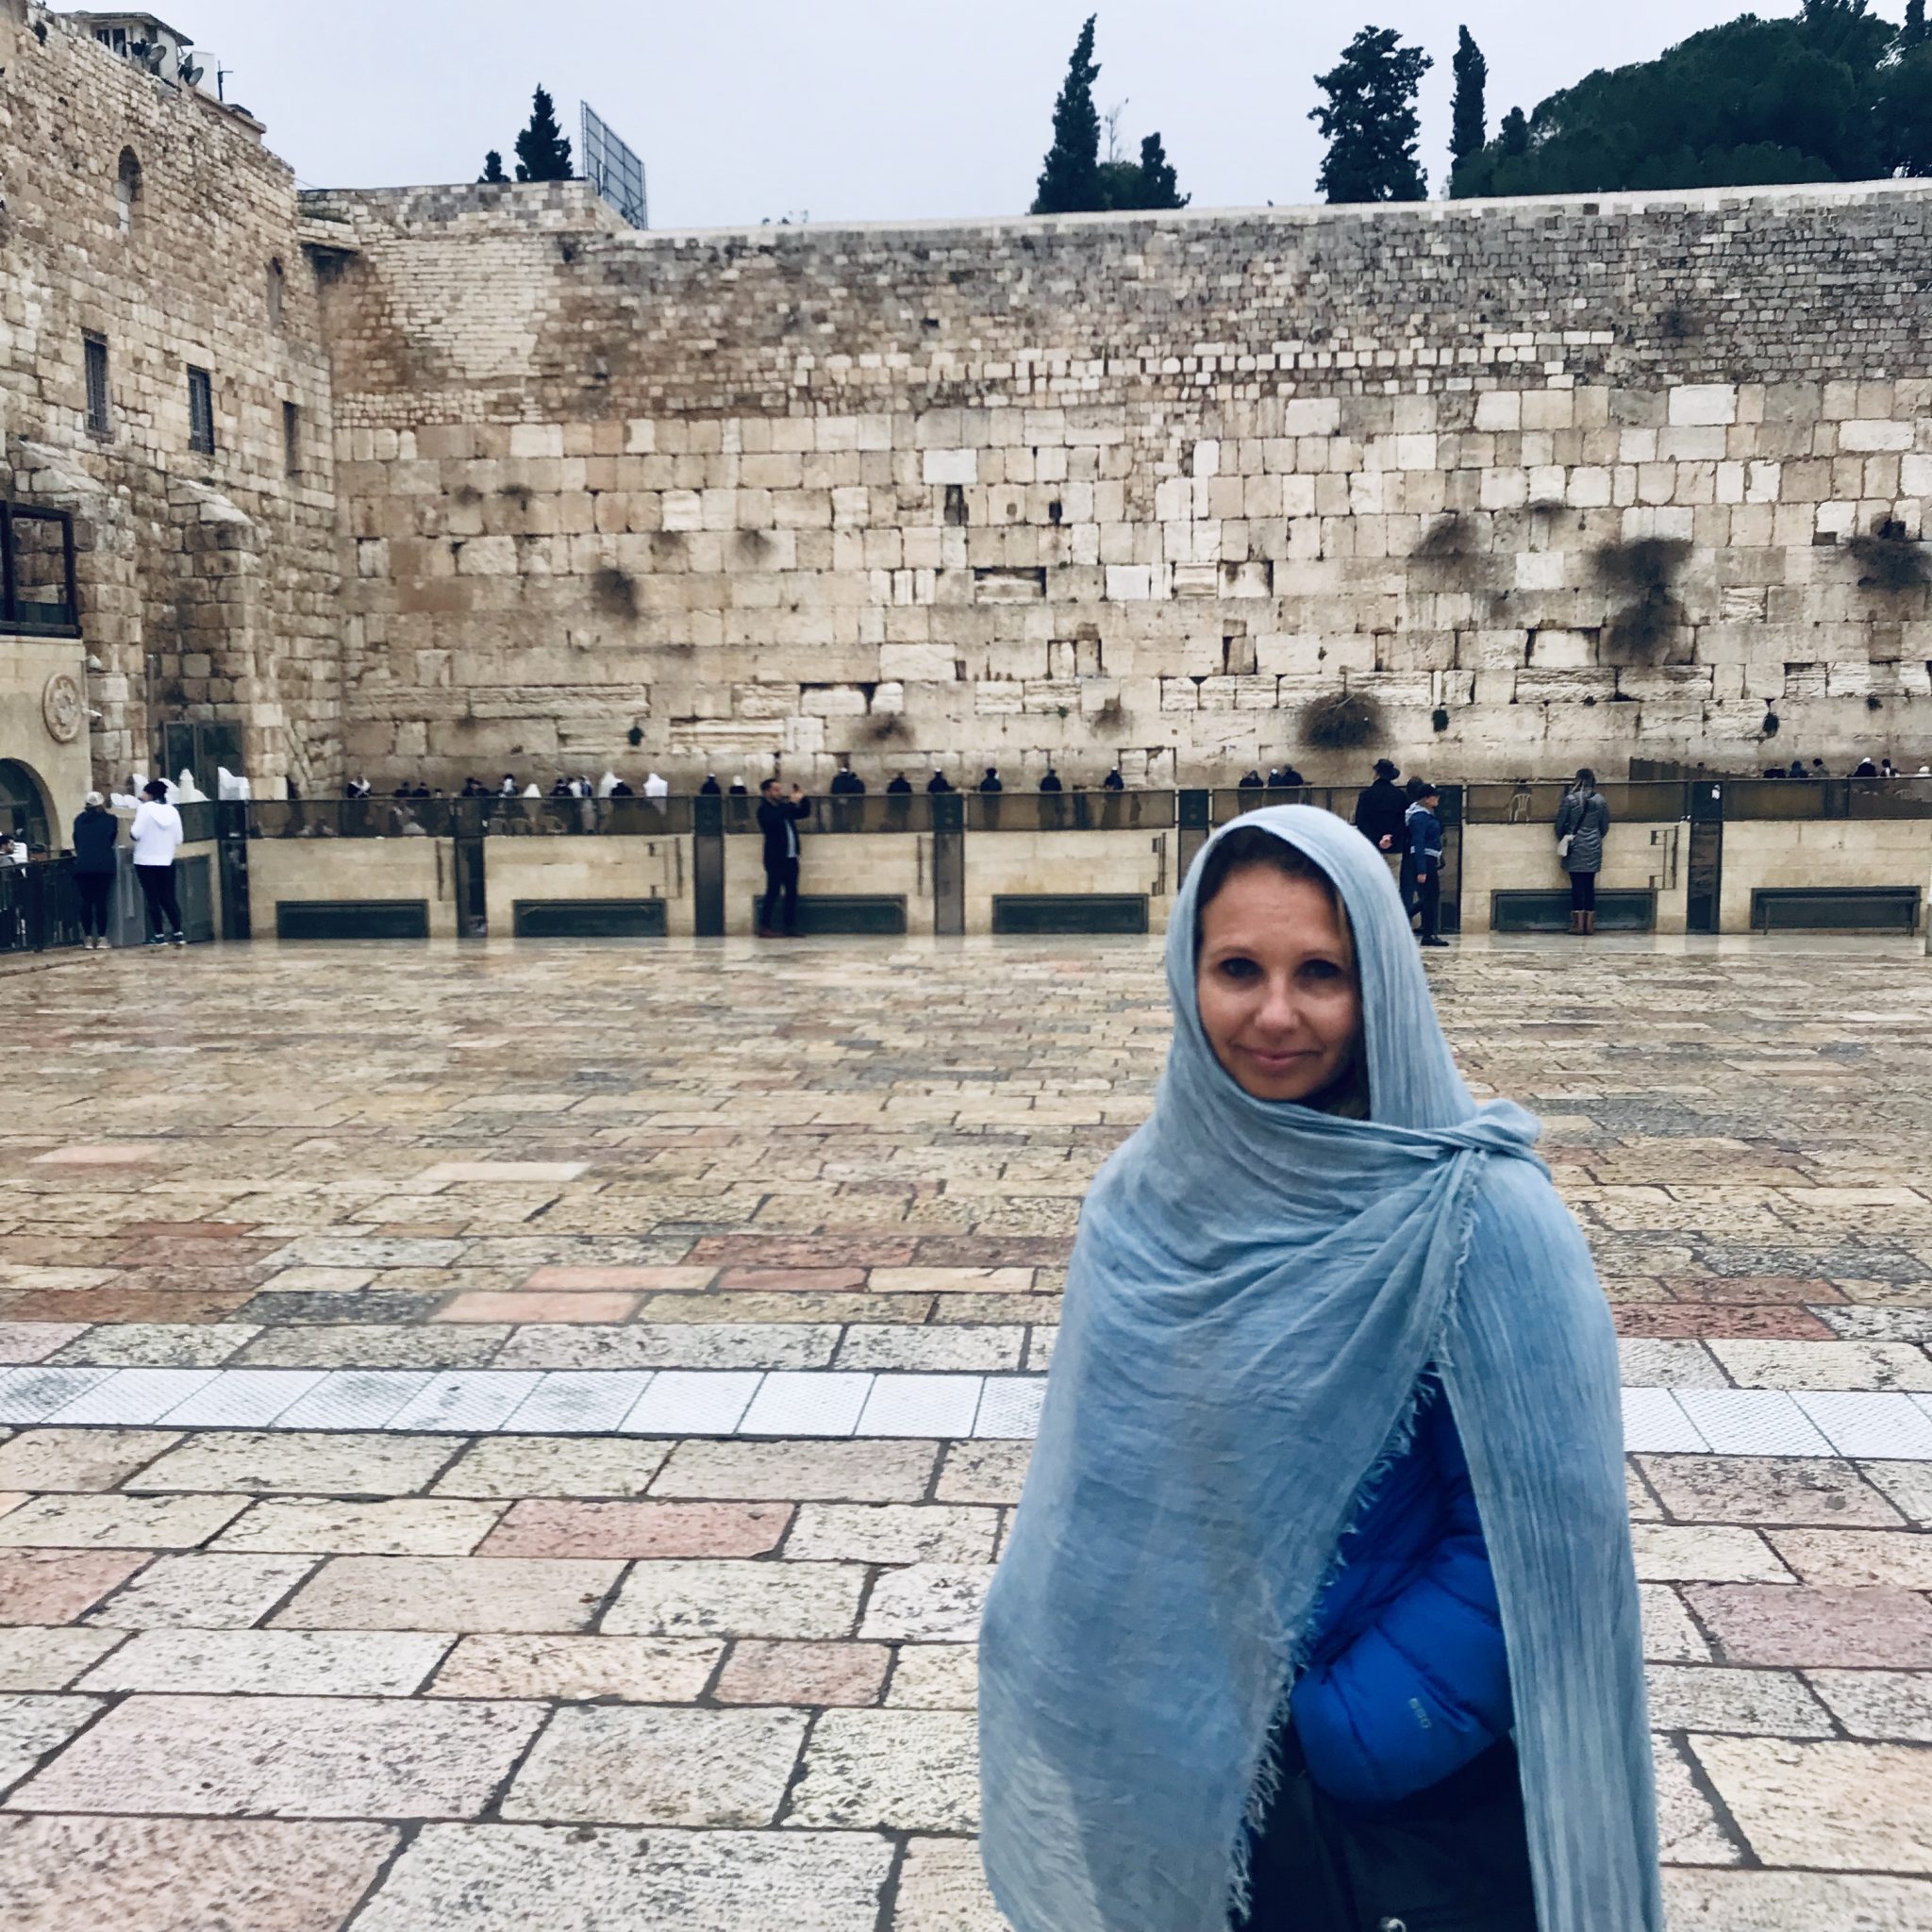 The Wailing Wall in Jerusalem, Israel. Modesty required.